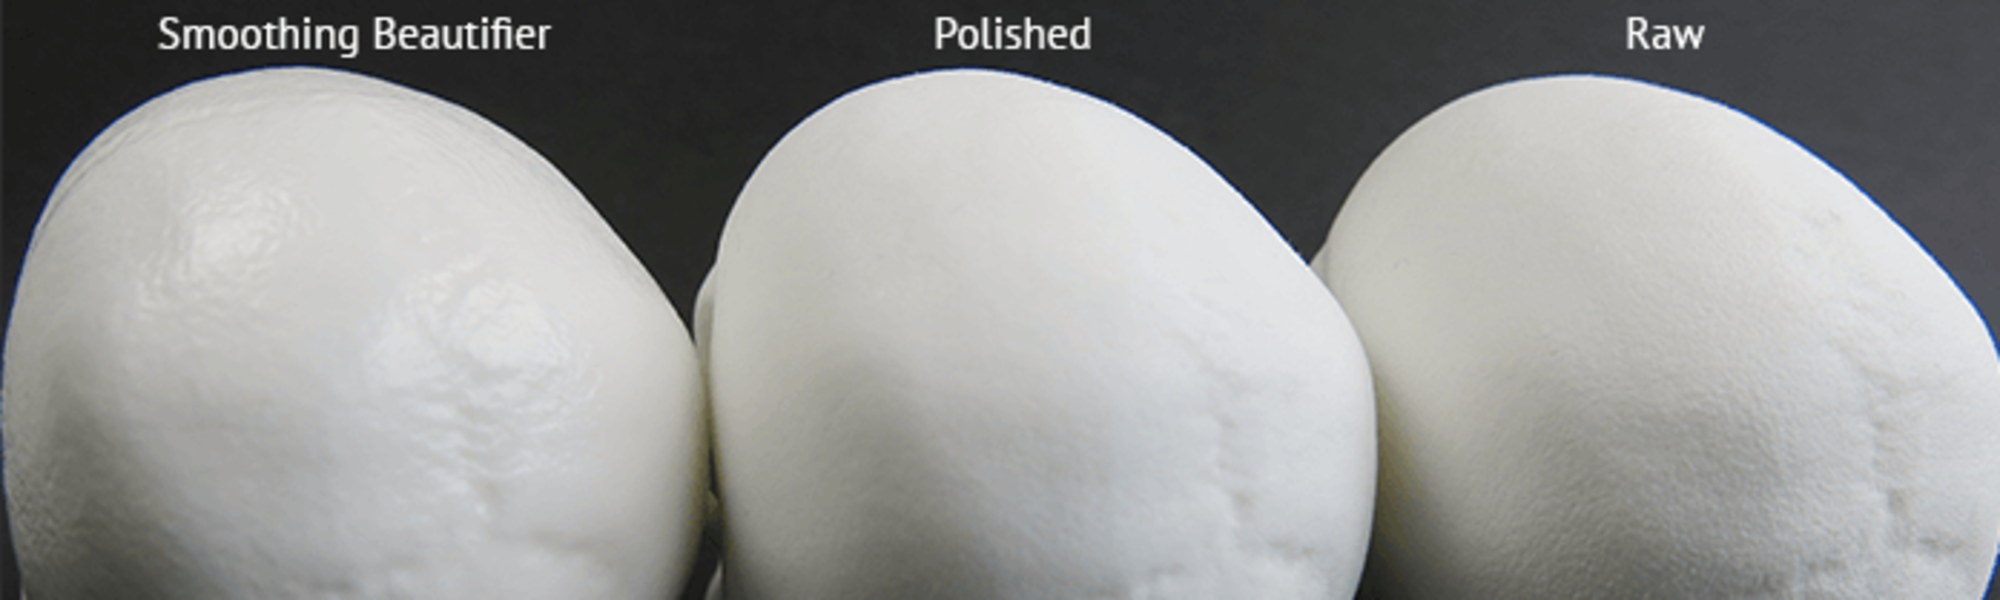 Difference between Smoothing Beautifier surface - polished surface - raw surface 